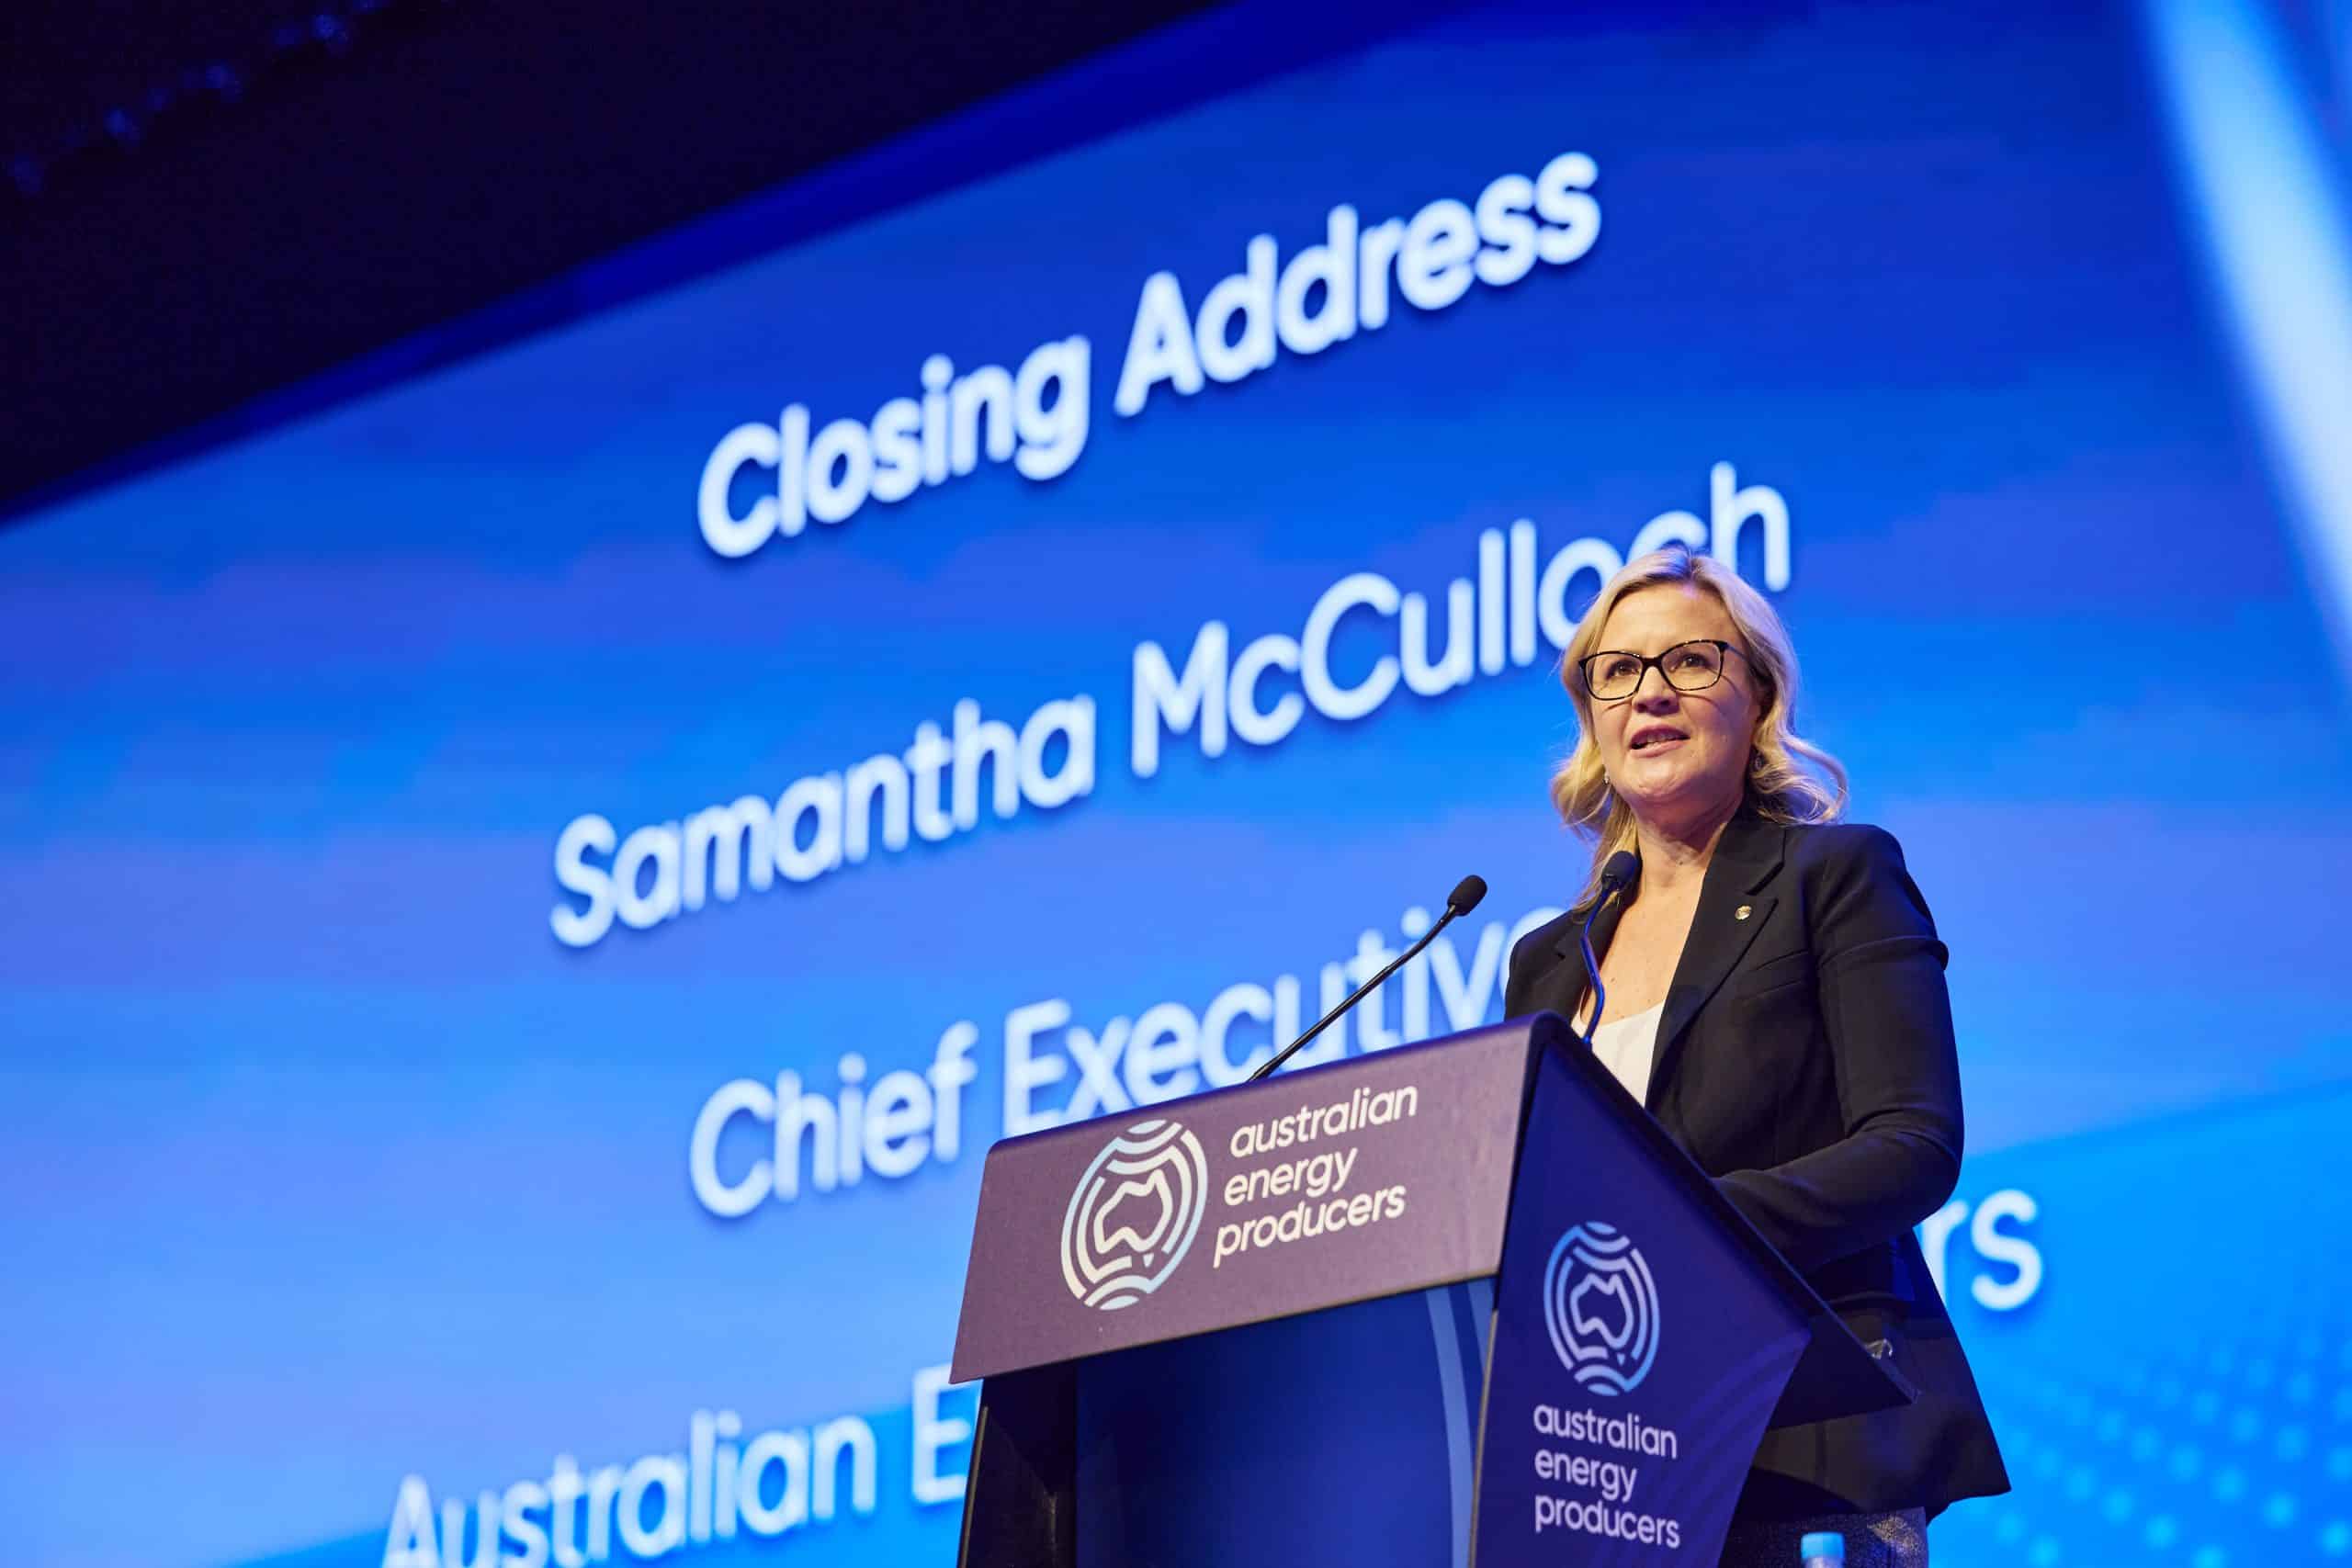 Speech: Samantha McCulloch closing address to the 2024 Conference & Exhibition